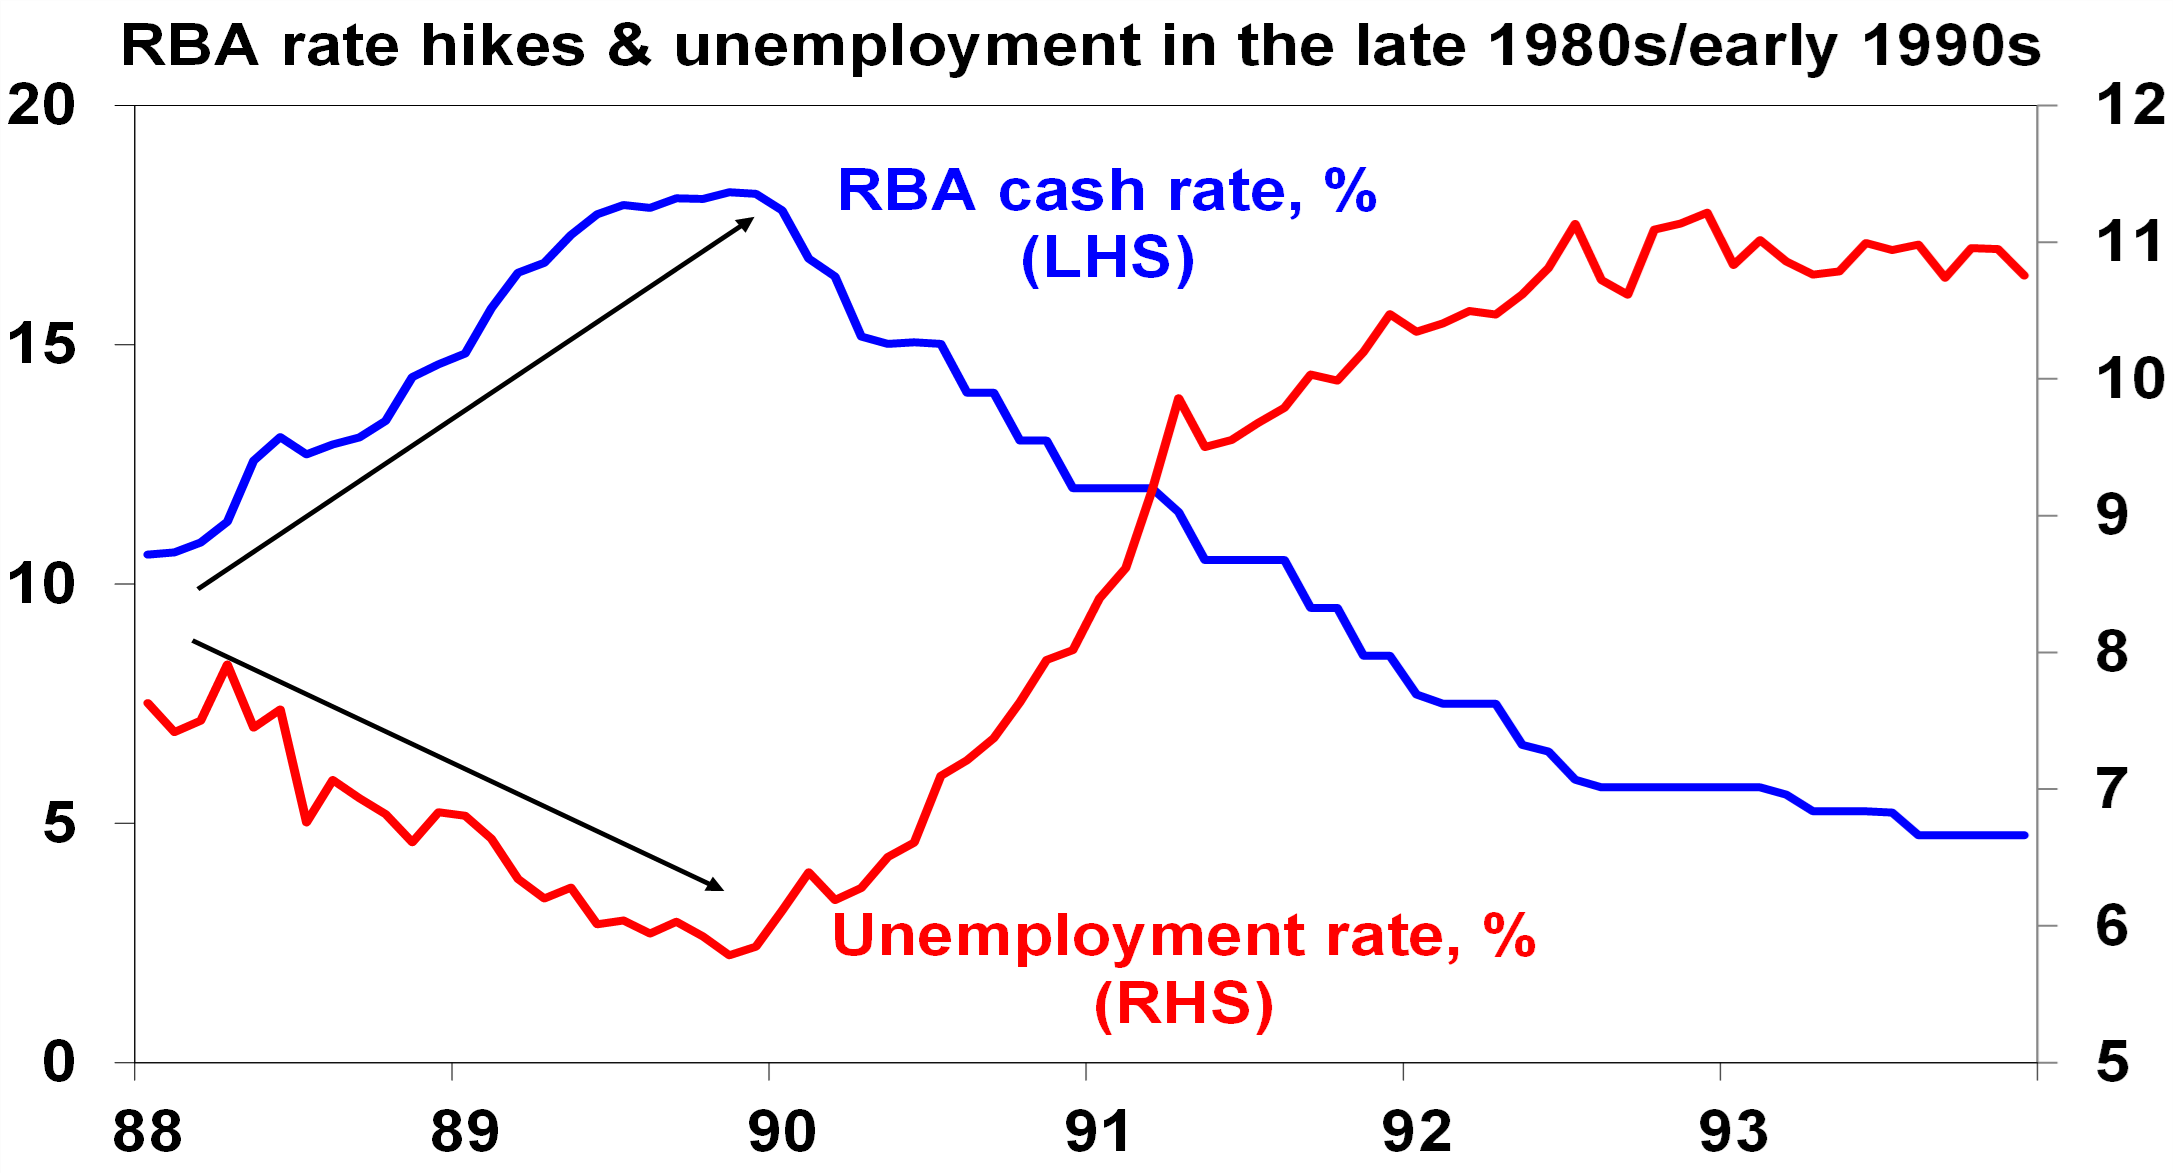 RBA rate hikes & unemployment 1980s
